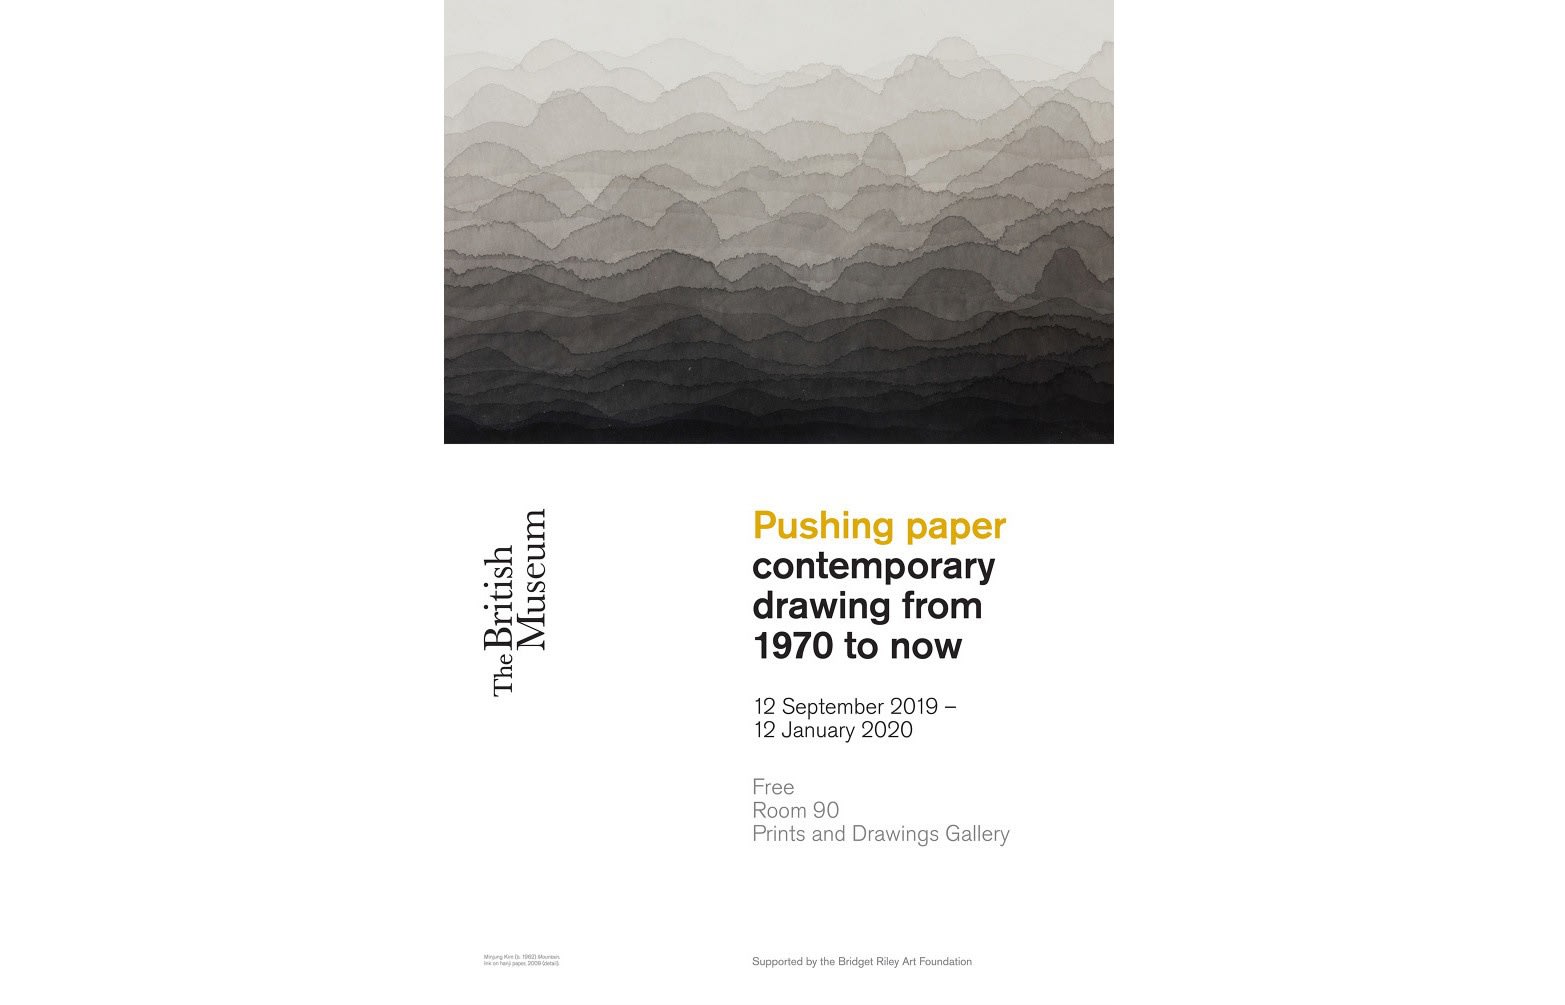 Minjung KIM, Pushing paper contemporary drawing from 1970 to now, The British Museum, 2019 - 2020